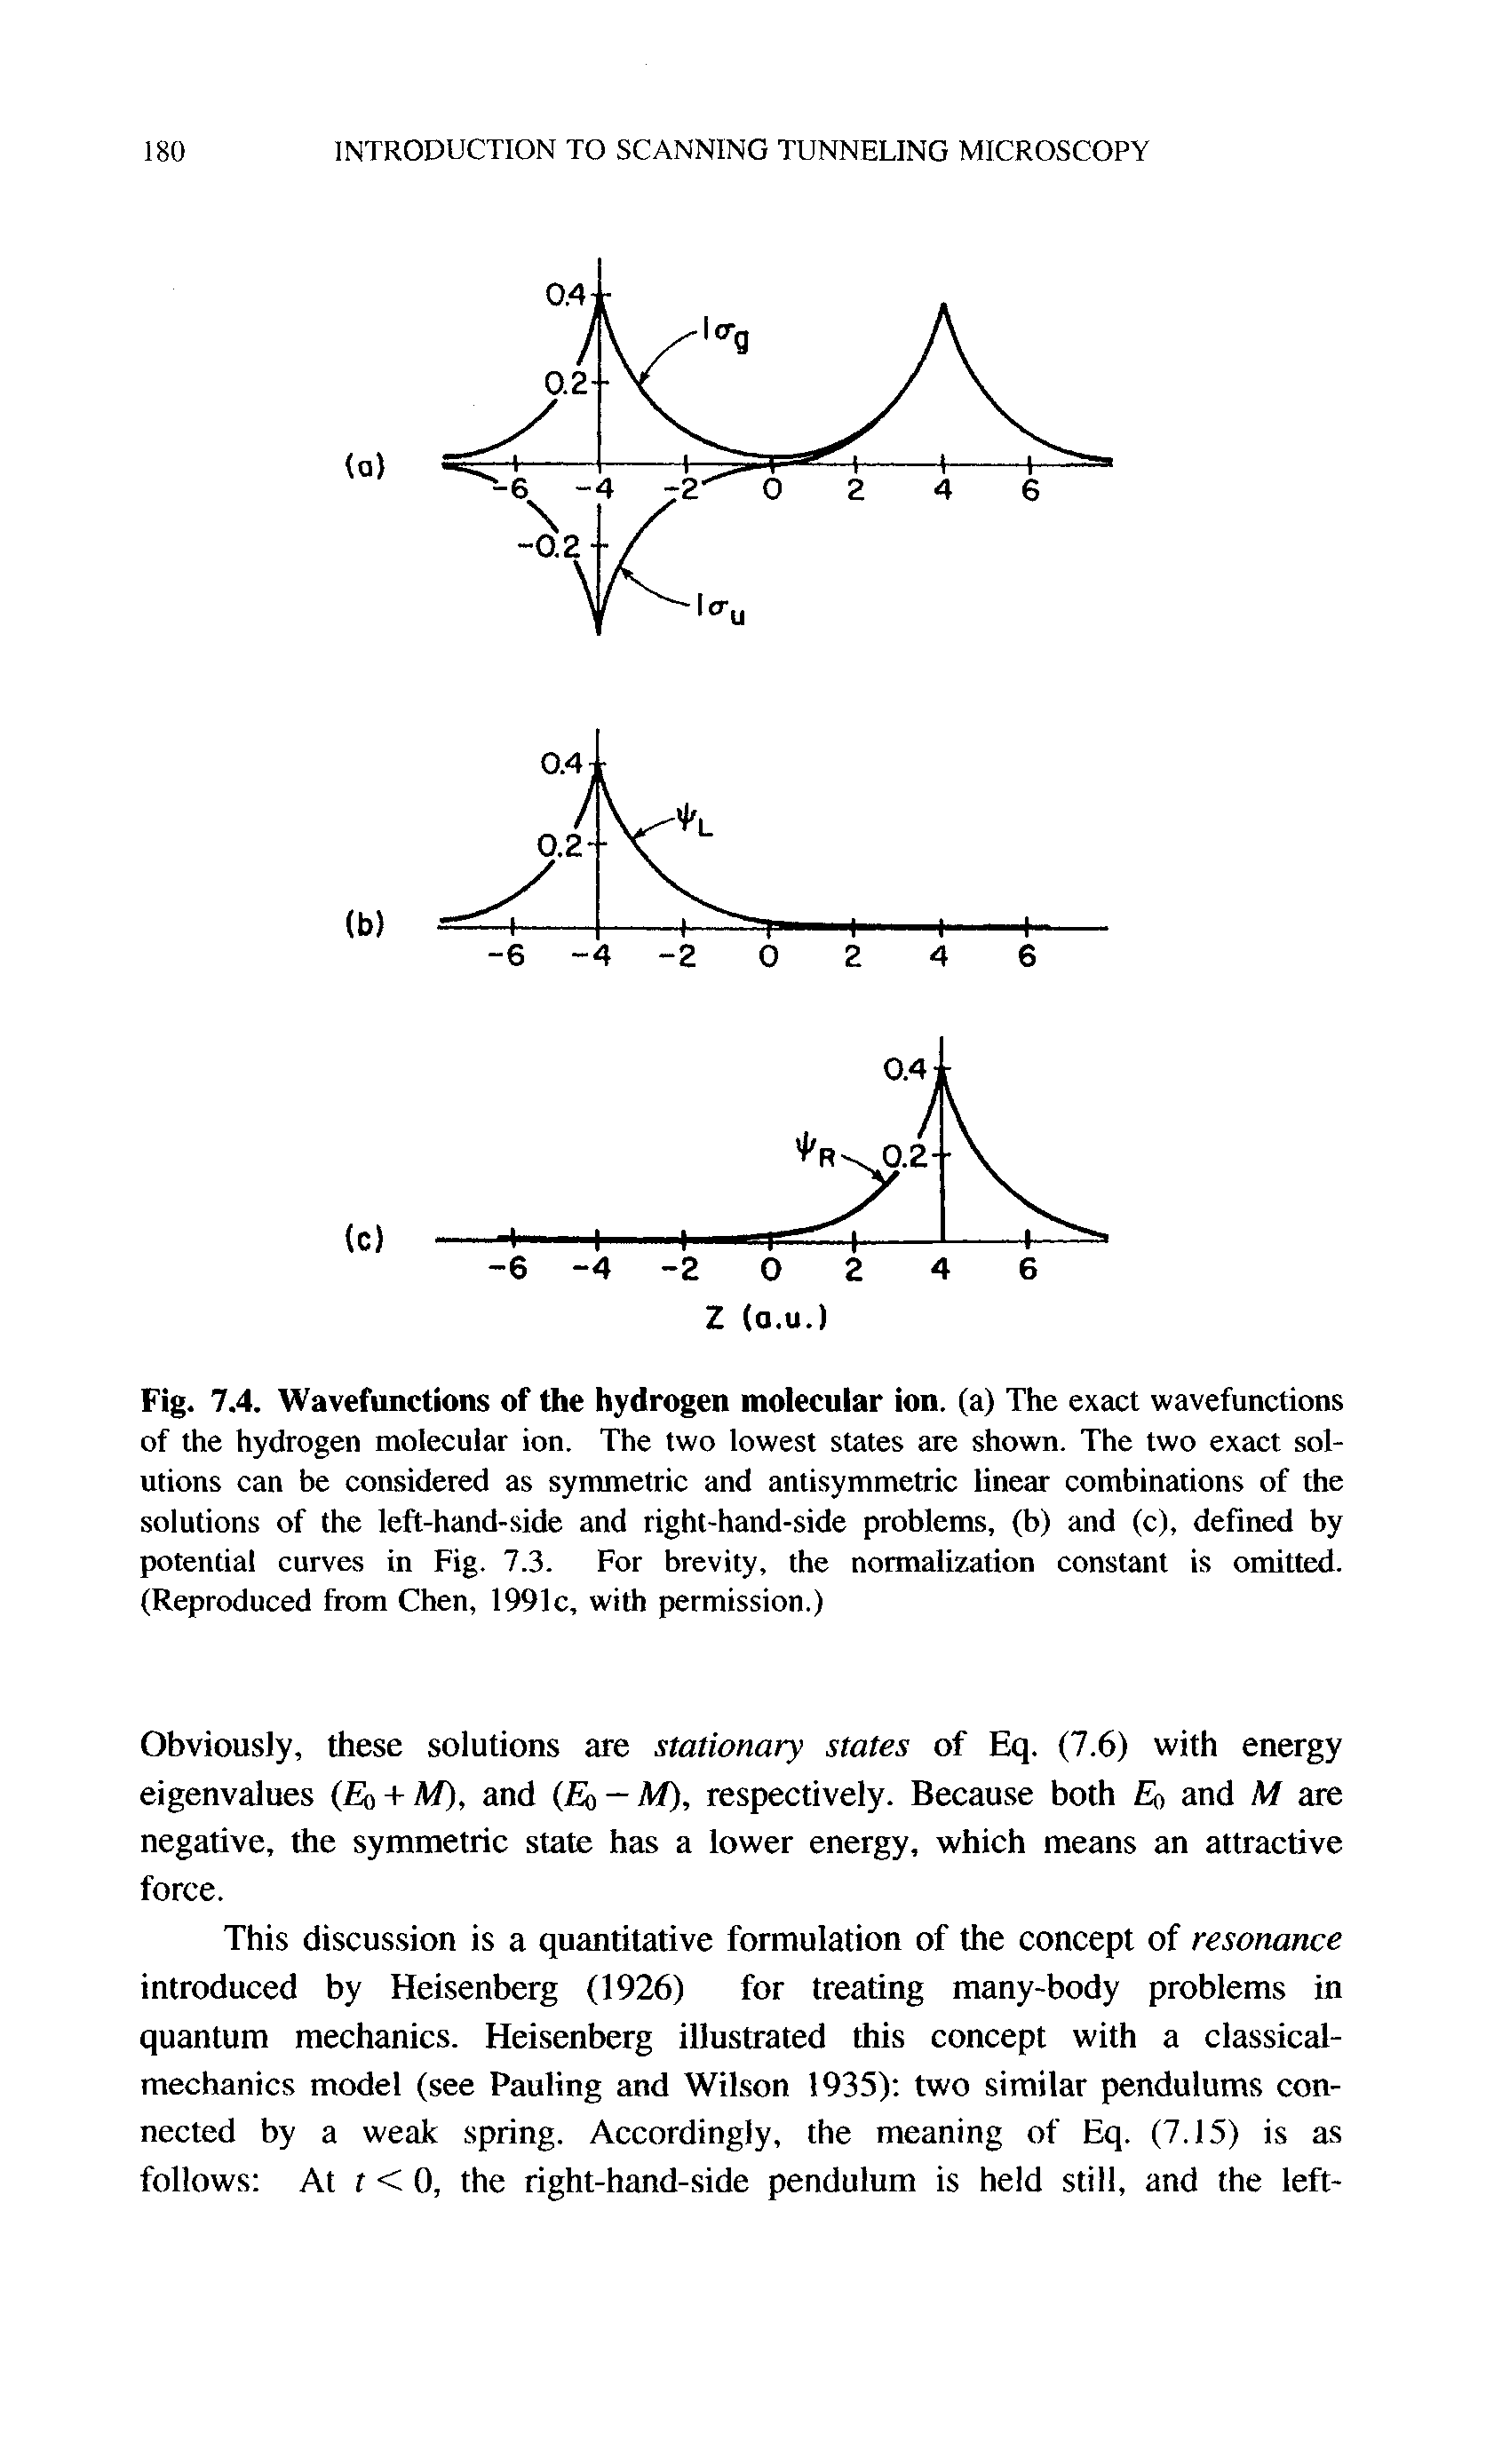 Fig. 7.4. Wavefunctions of the hydrogen molecular ion. (a) The exact wavefunctions of the hydrogen molecular ion. The two lowest states are shown. The two exact solutions can be considered as symmetric and antisymmetric linear combinations of the solutions of the left-hand-side and right-hand-side problems, (b) and (c), defined by potential curves in Fig. 7.3. For brevity, the normalization constant is omitted. (Reproduced from Chen, 1991c, with permission.)...